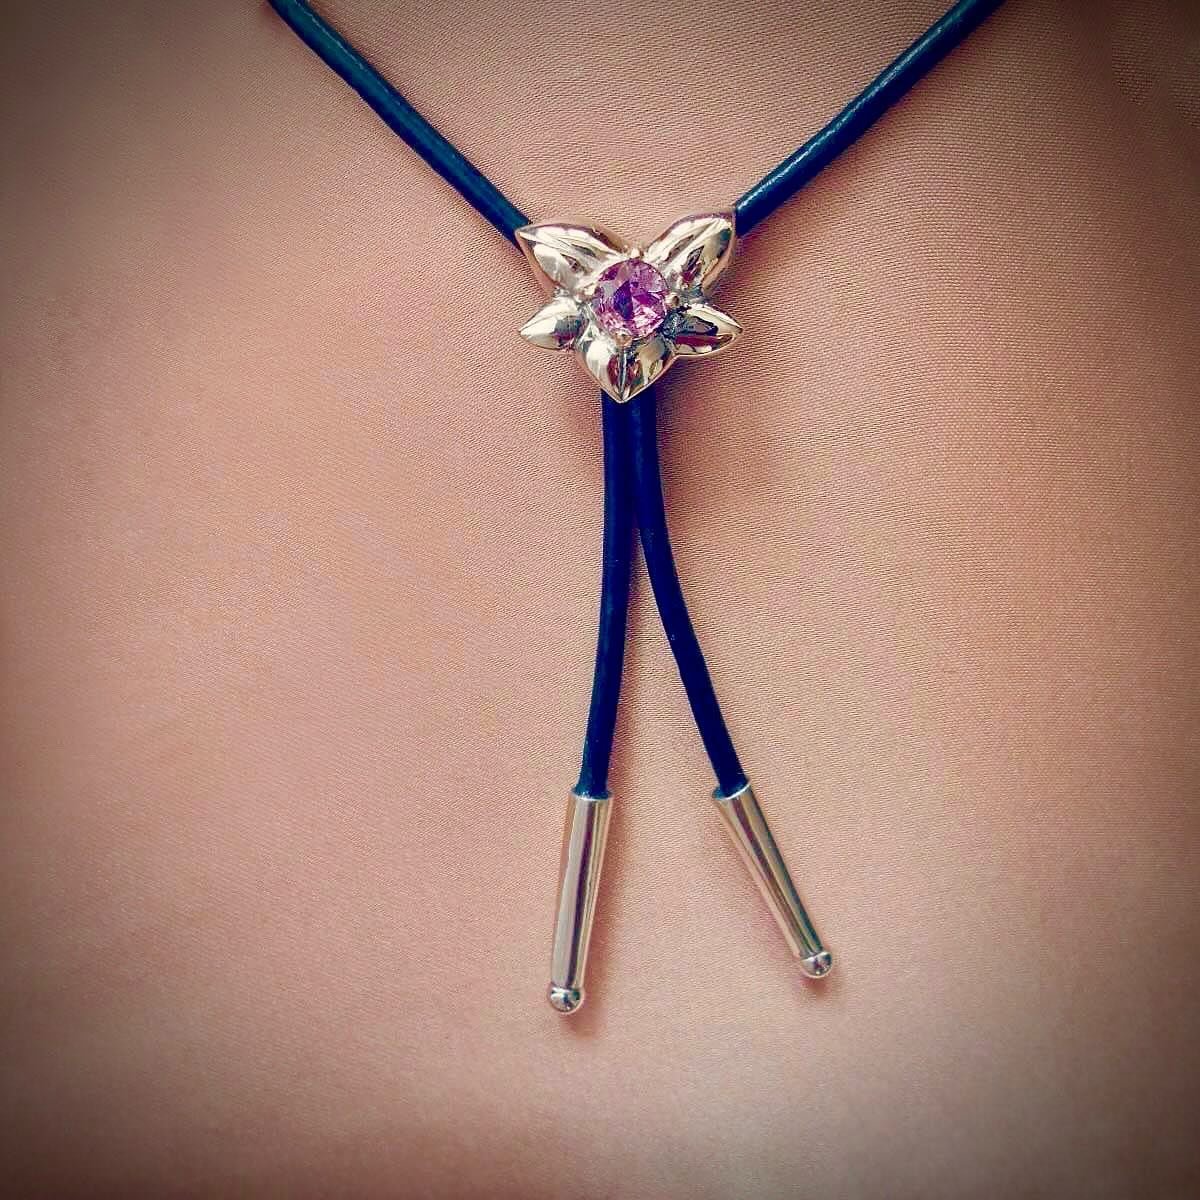 To mark the arrival of spring, as the evenings draw out, I was inspired to celebrate by making a dainty flower bolo tie necklace. Set with a delicate pink sapphire on a silver tipped cord, wear it short like a choker or long - or somewhere in between